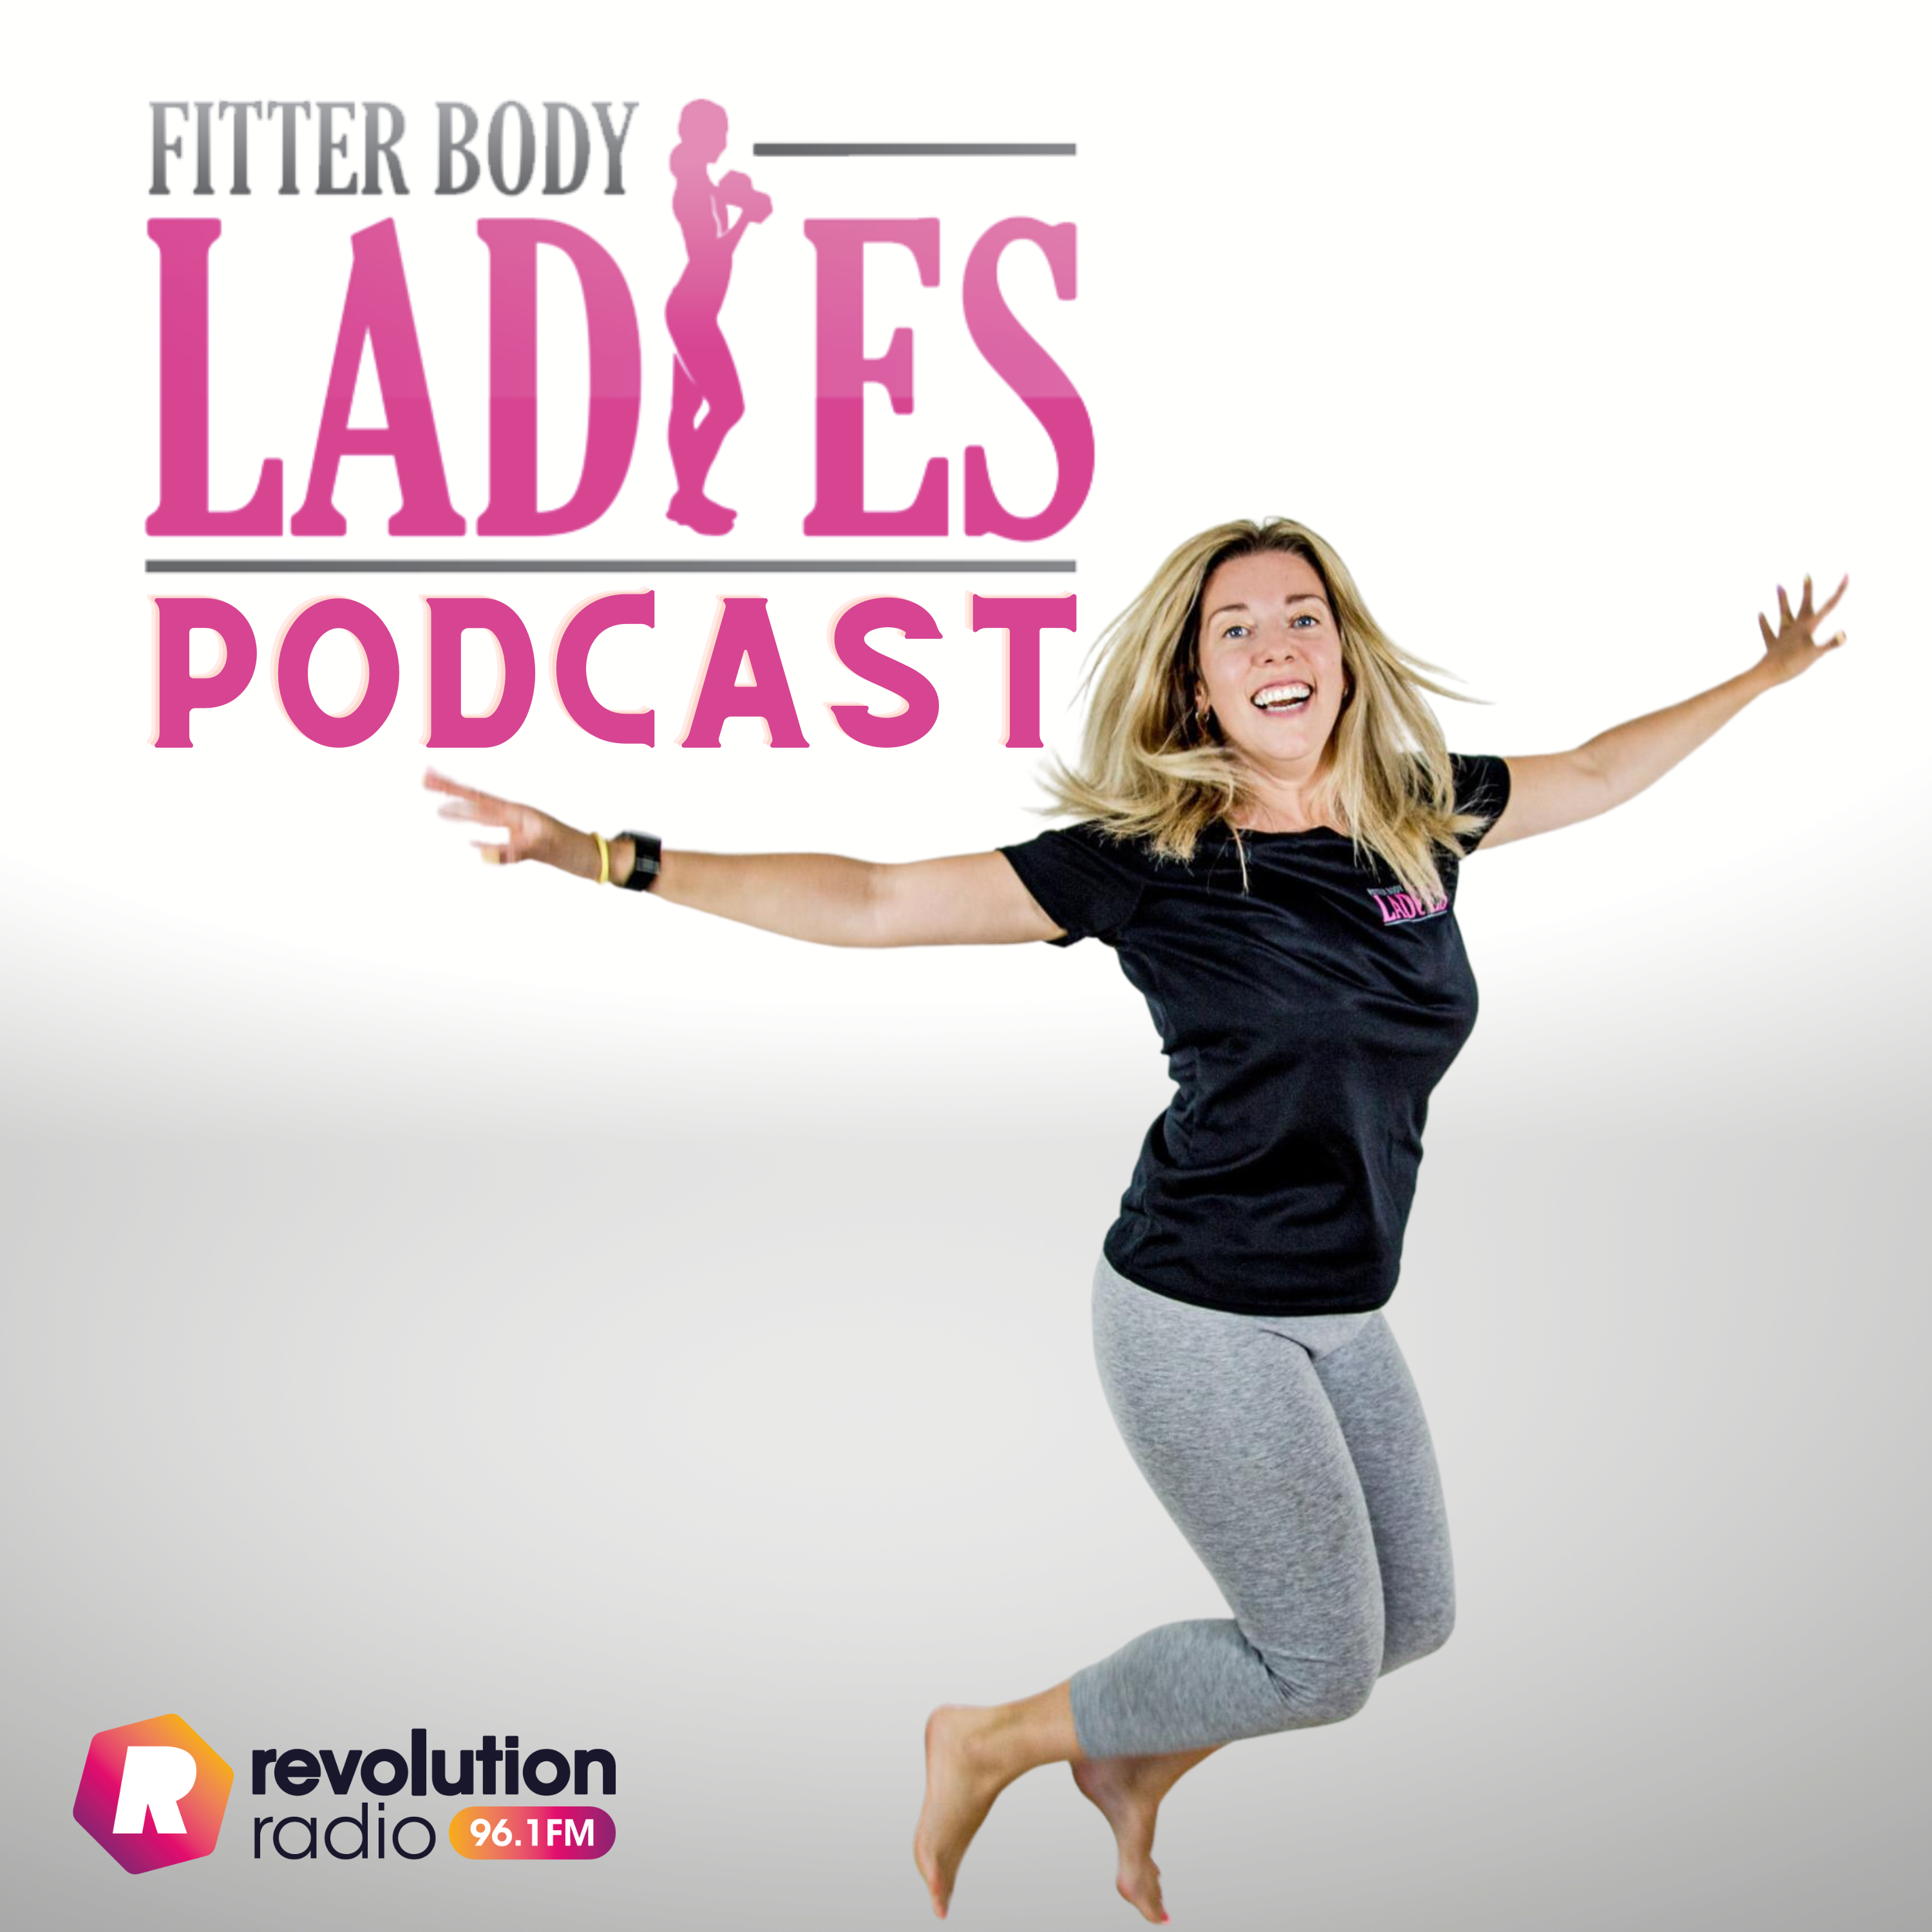 Fitter Body Ladies Podcast